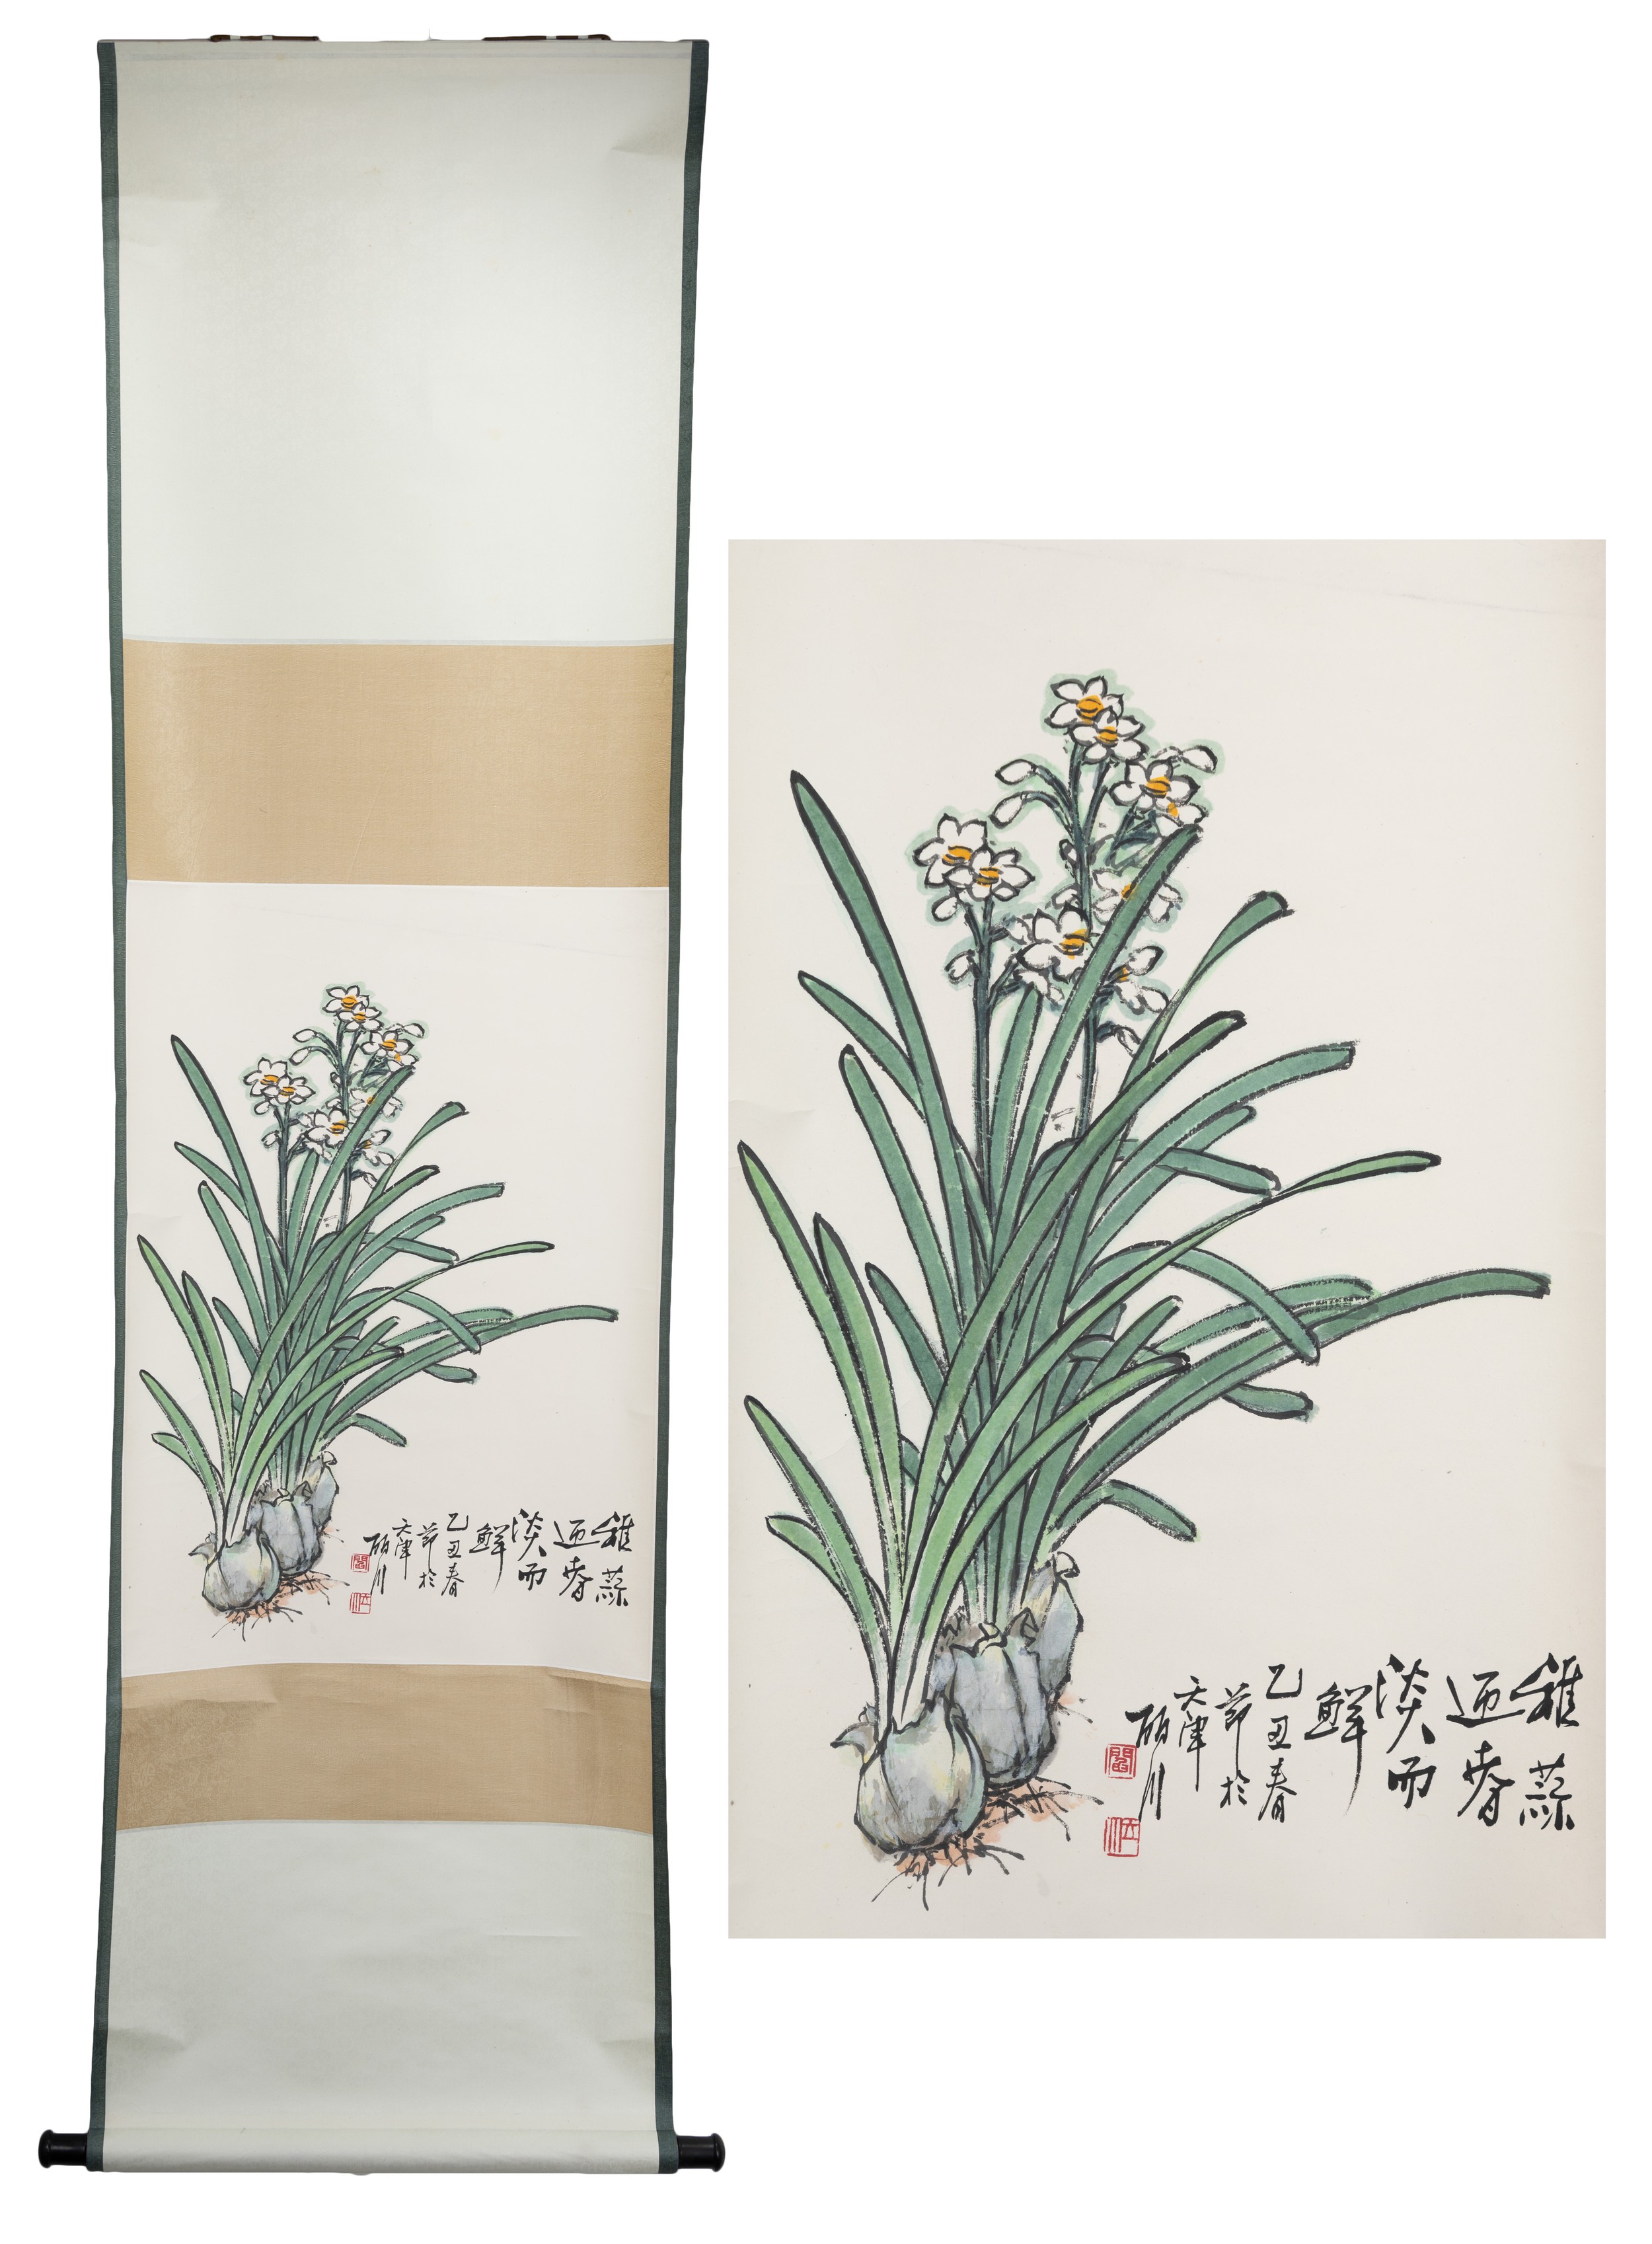 CHINESE SCROLL PAINTING OF NARCISSUS FLOWERS BY PROF. YAN TIEZHEN, painted in Tianjin, ink on paper,